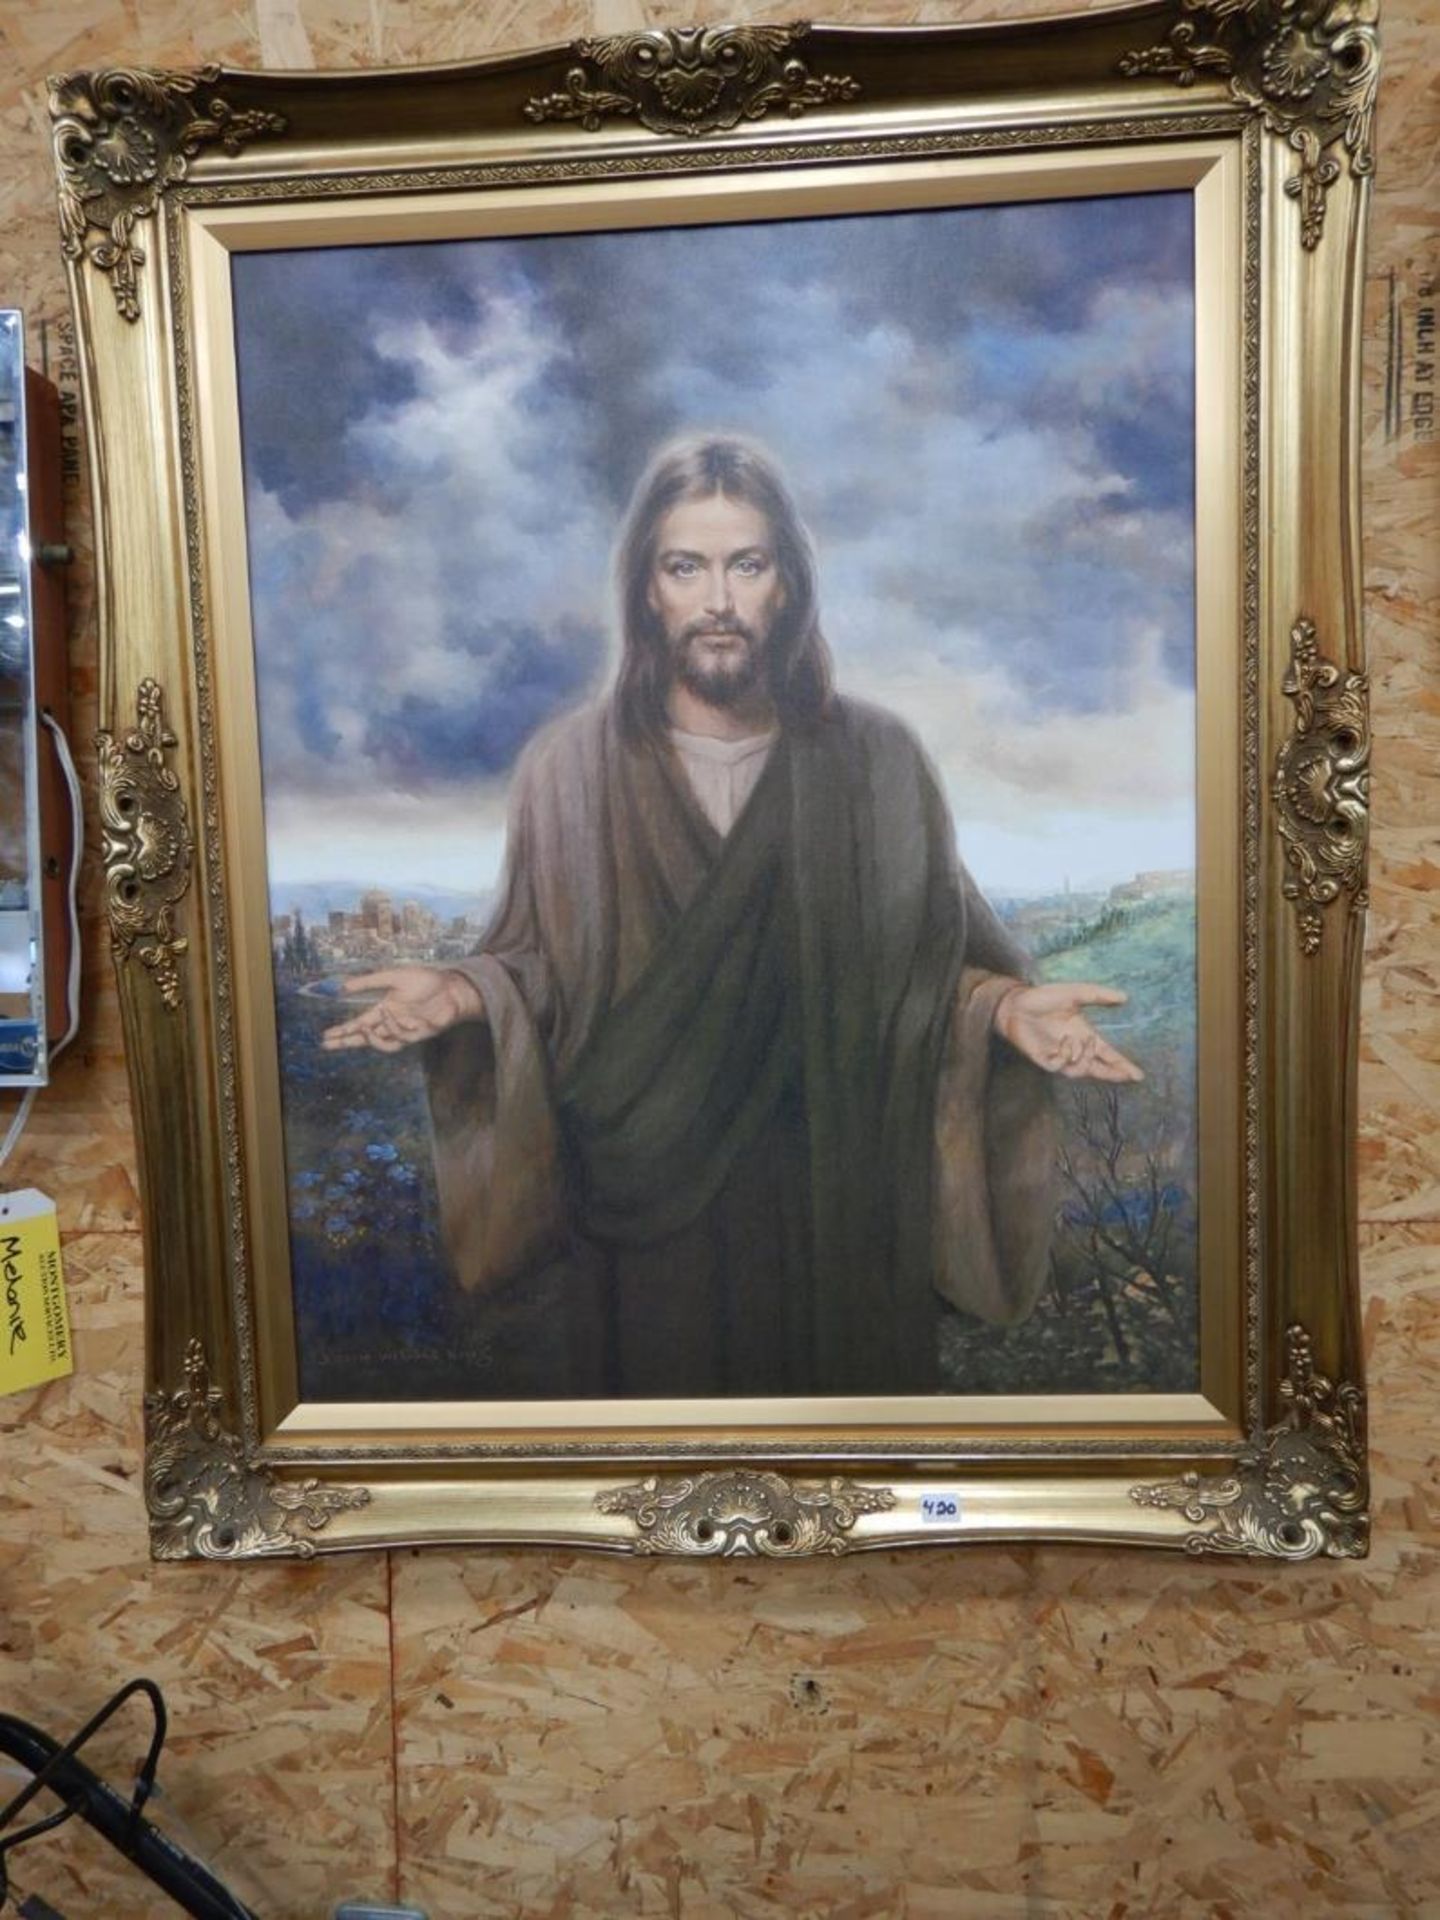 FRAMED JESUS CHRIST CANVAS PRINT 30INX36IN BY JOESEPH WALLACE KING